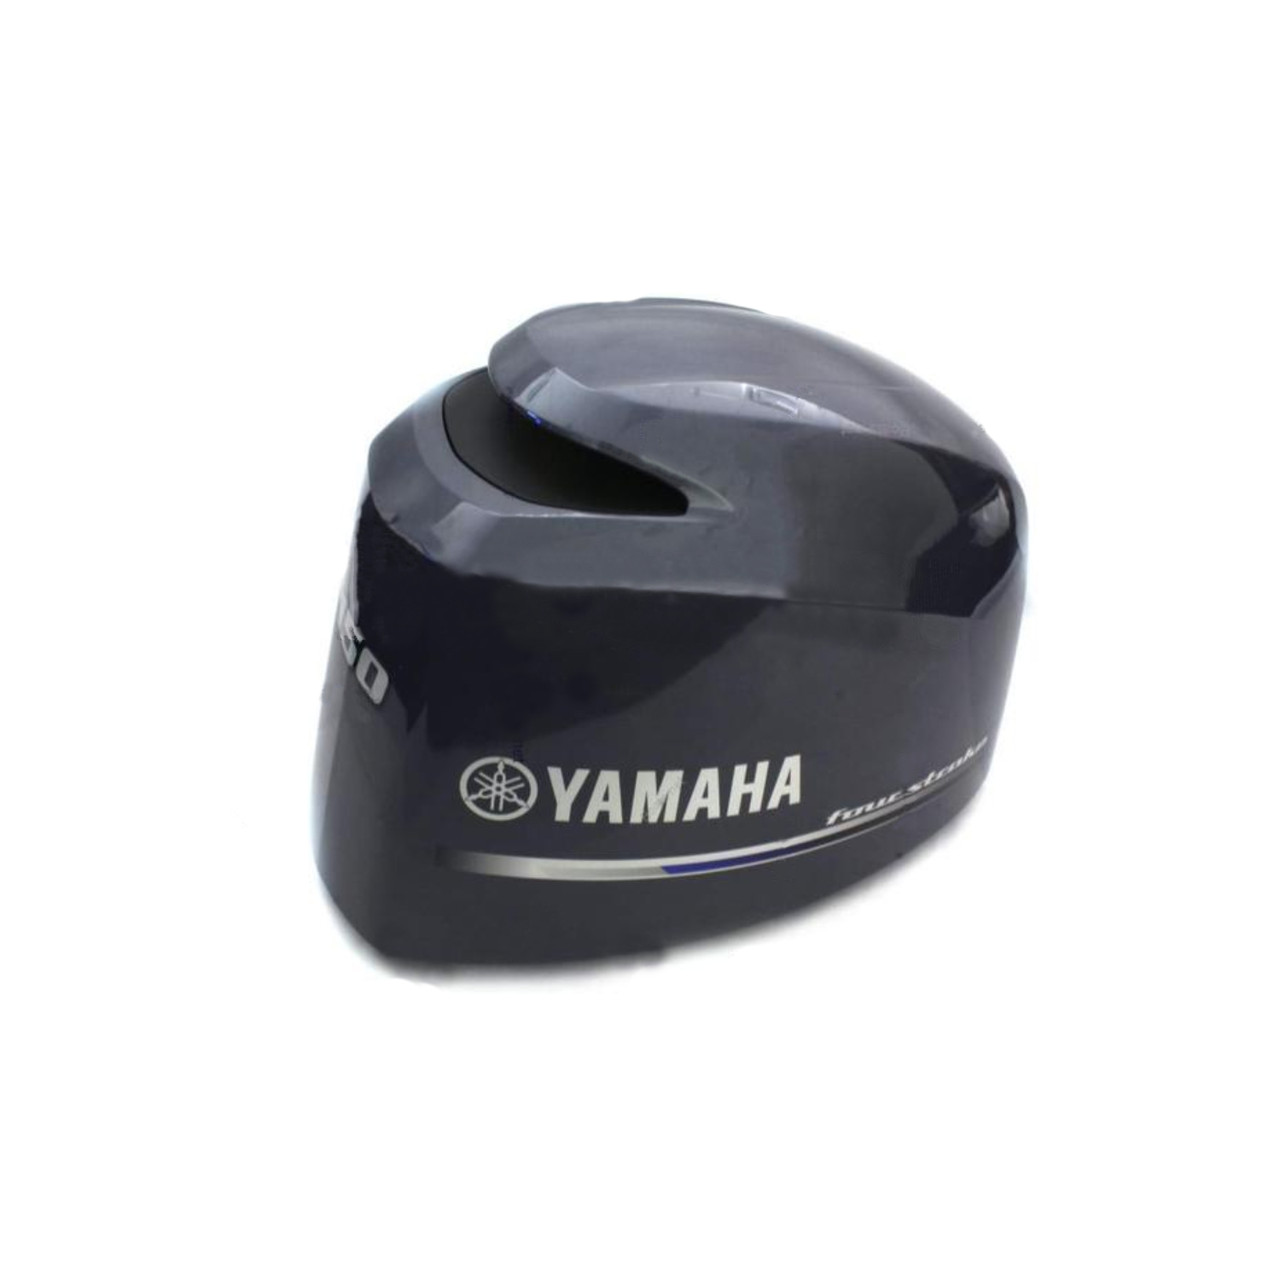 Yamaha New OEM TOP COWLING ASSEMBLY 63P-42610-41-00, 63P-42610-40-00